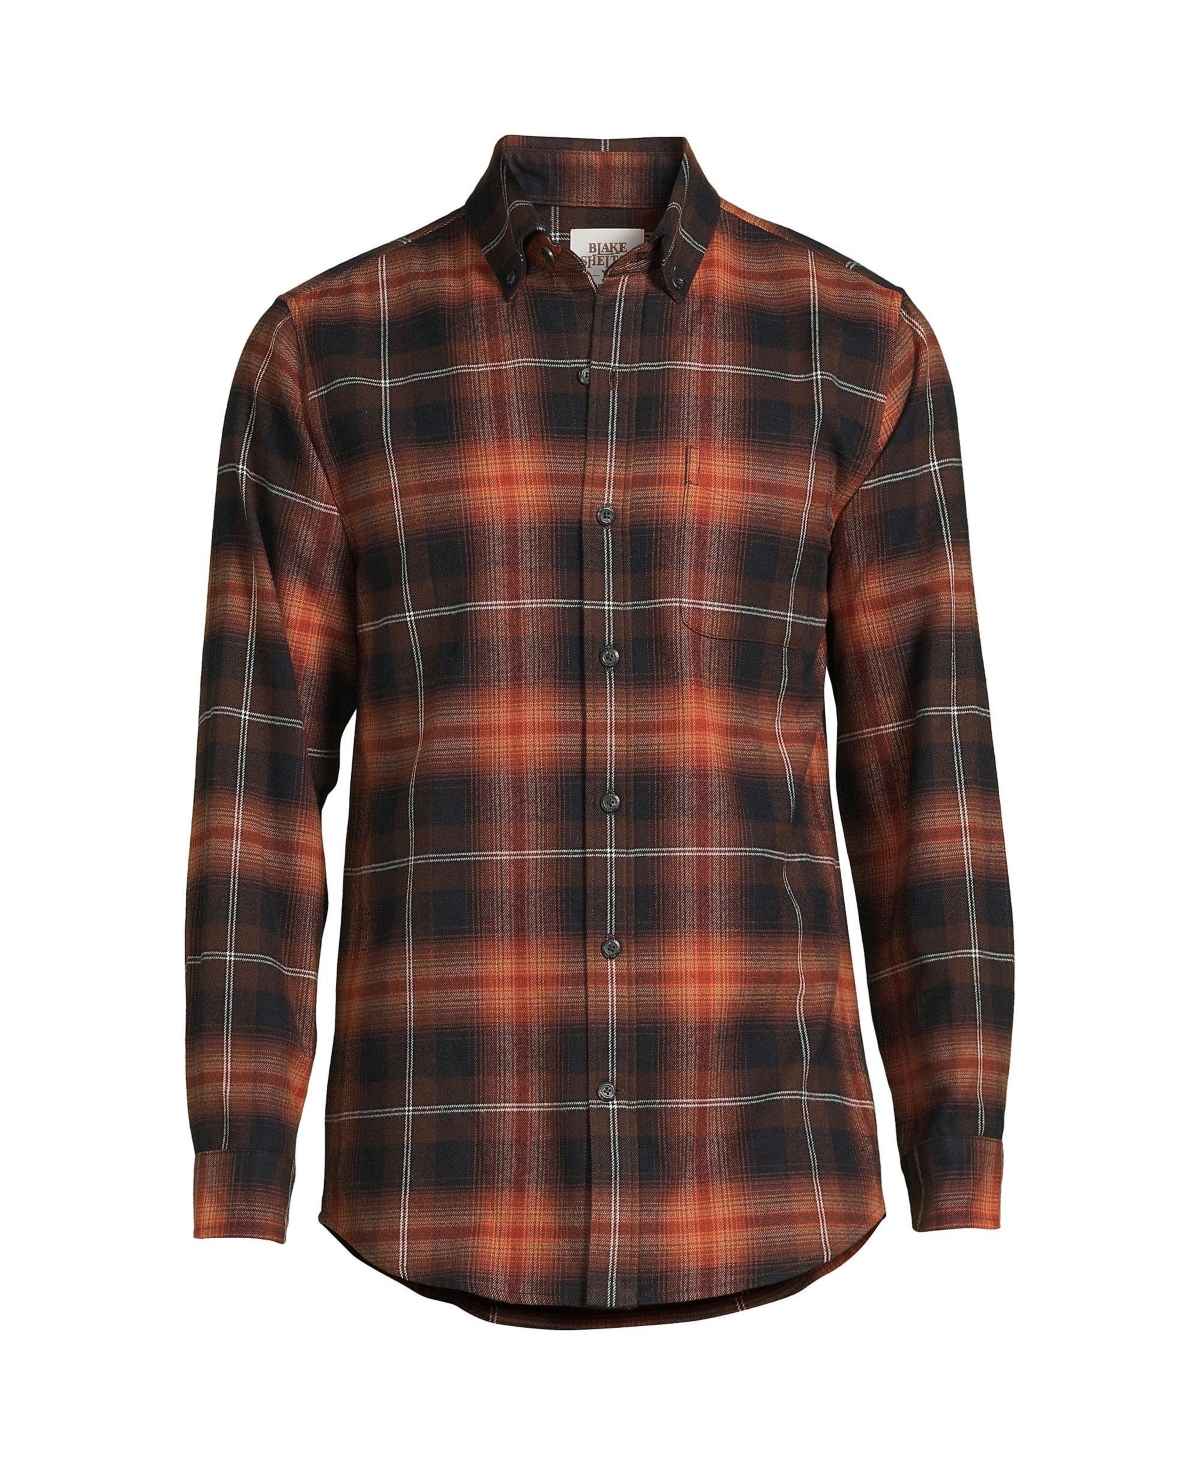 Blake Shelton x Lands' End Men's Traditional Fit Flagship Flannel Shirt - Mulled wine six strings plaid